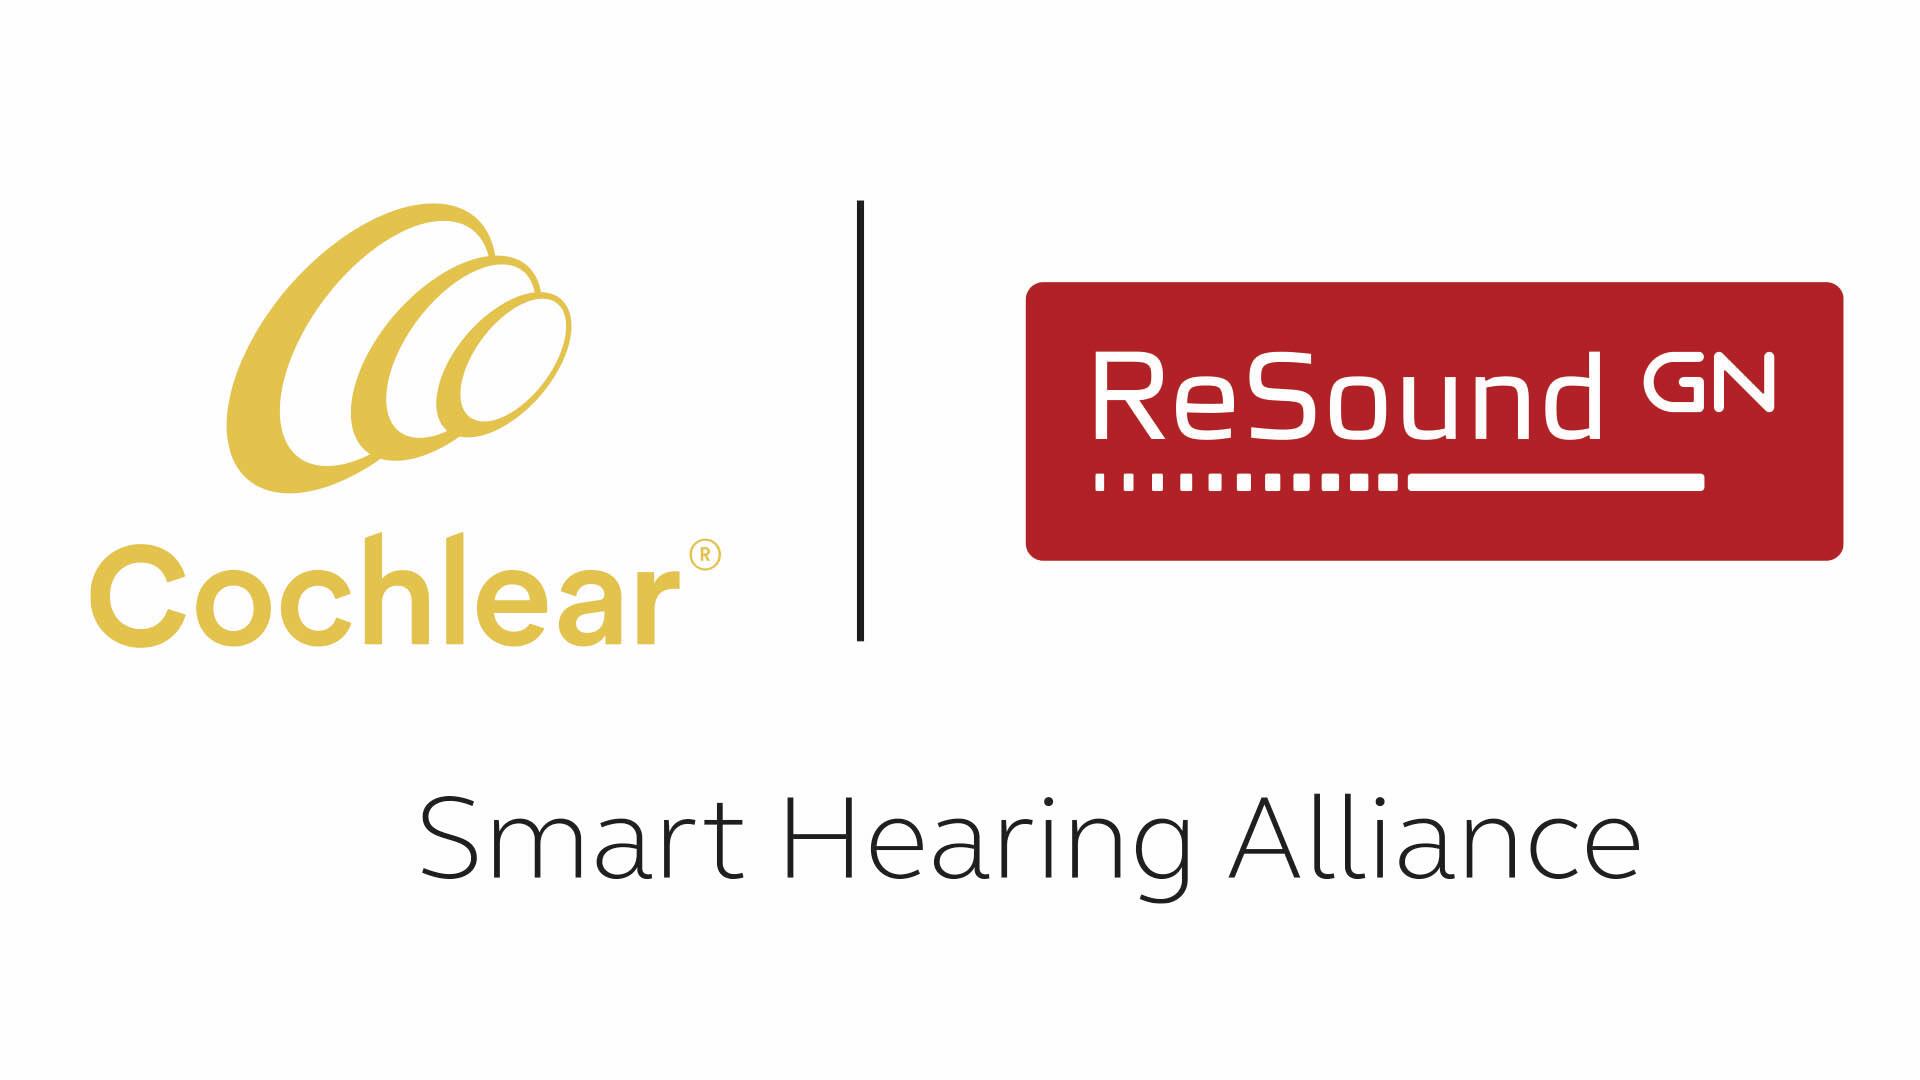 Cochlear and ReSound logos